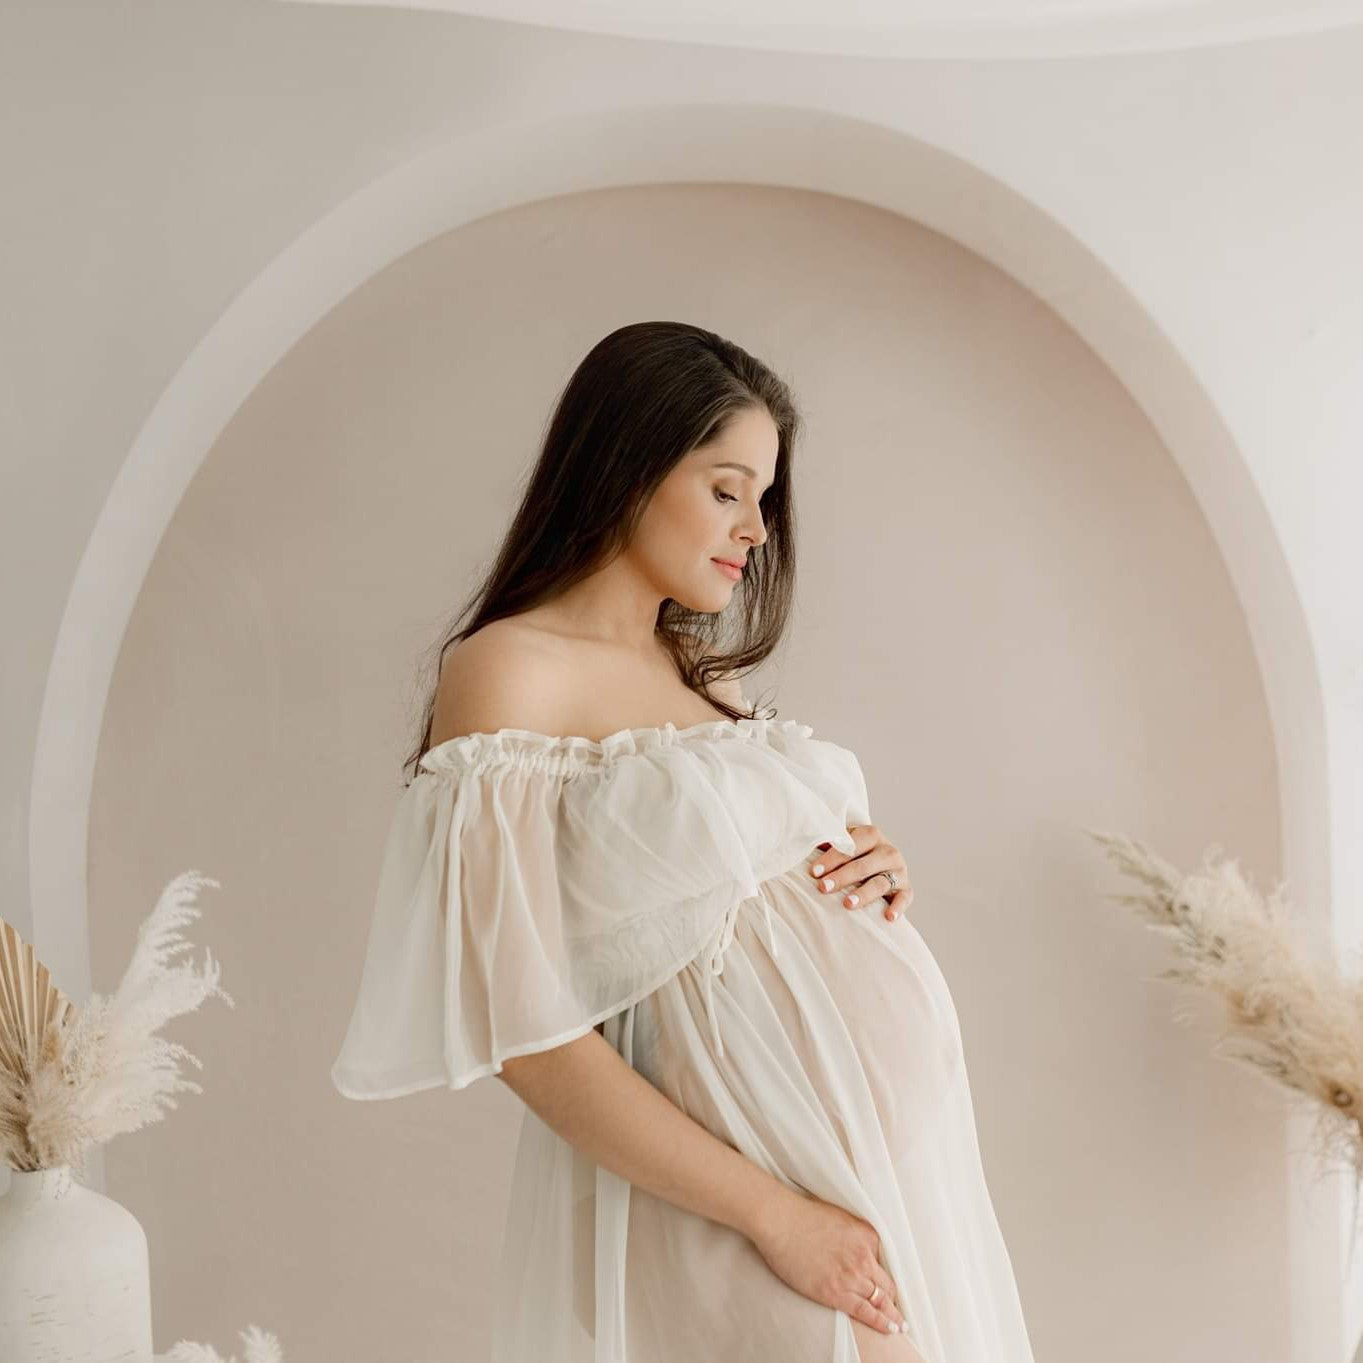 The expectant mother touching her pregnant belly in front of the boho simple white arch